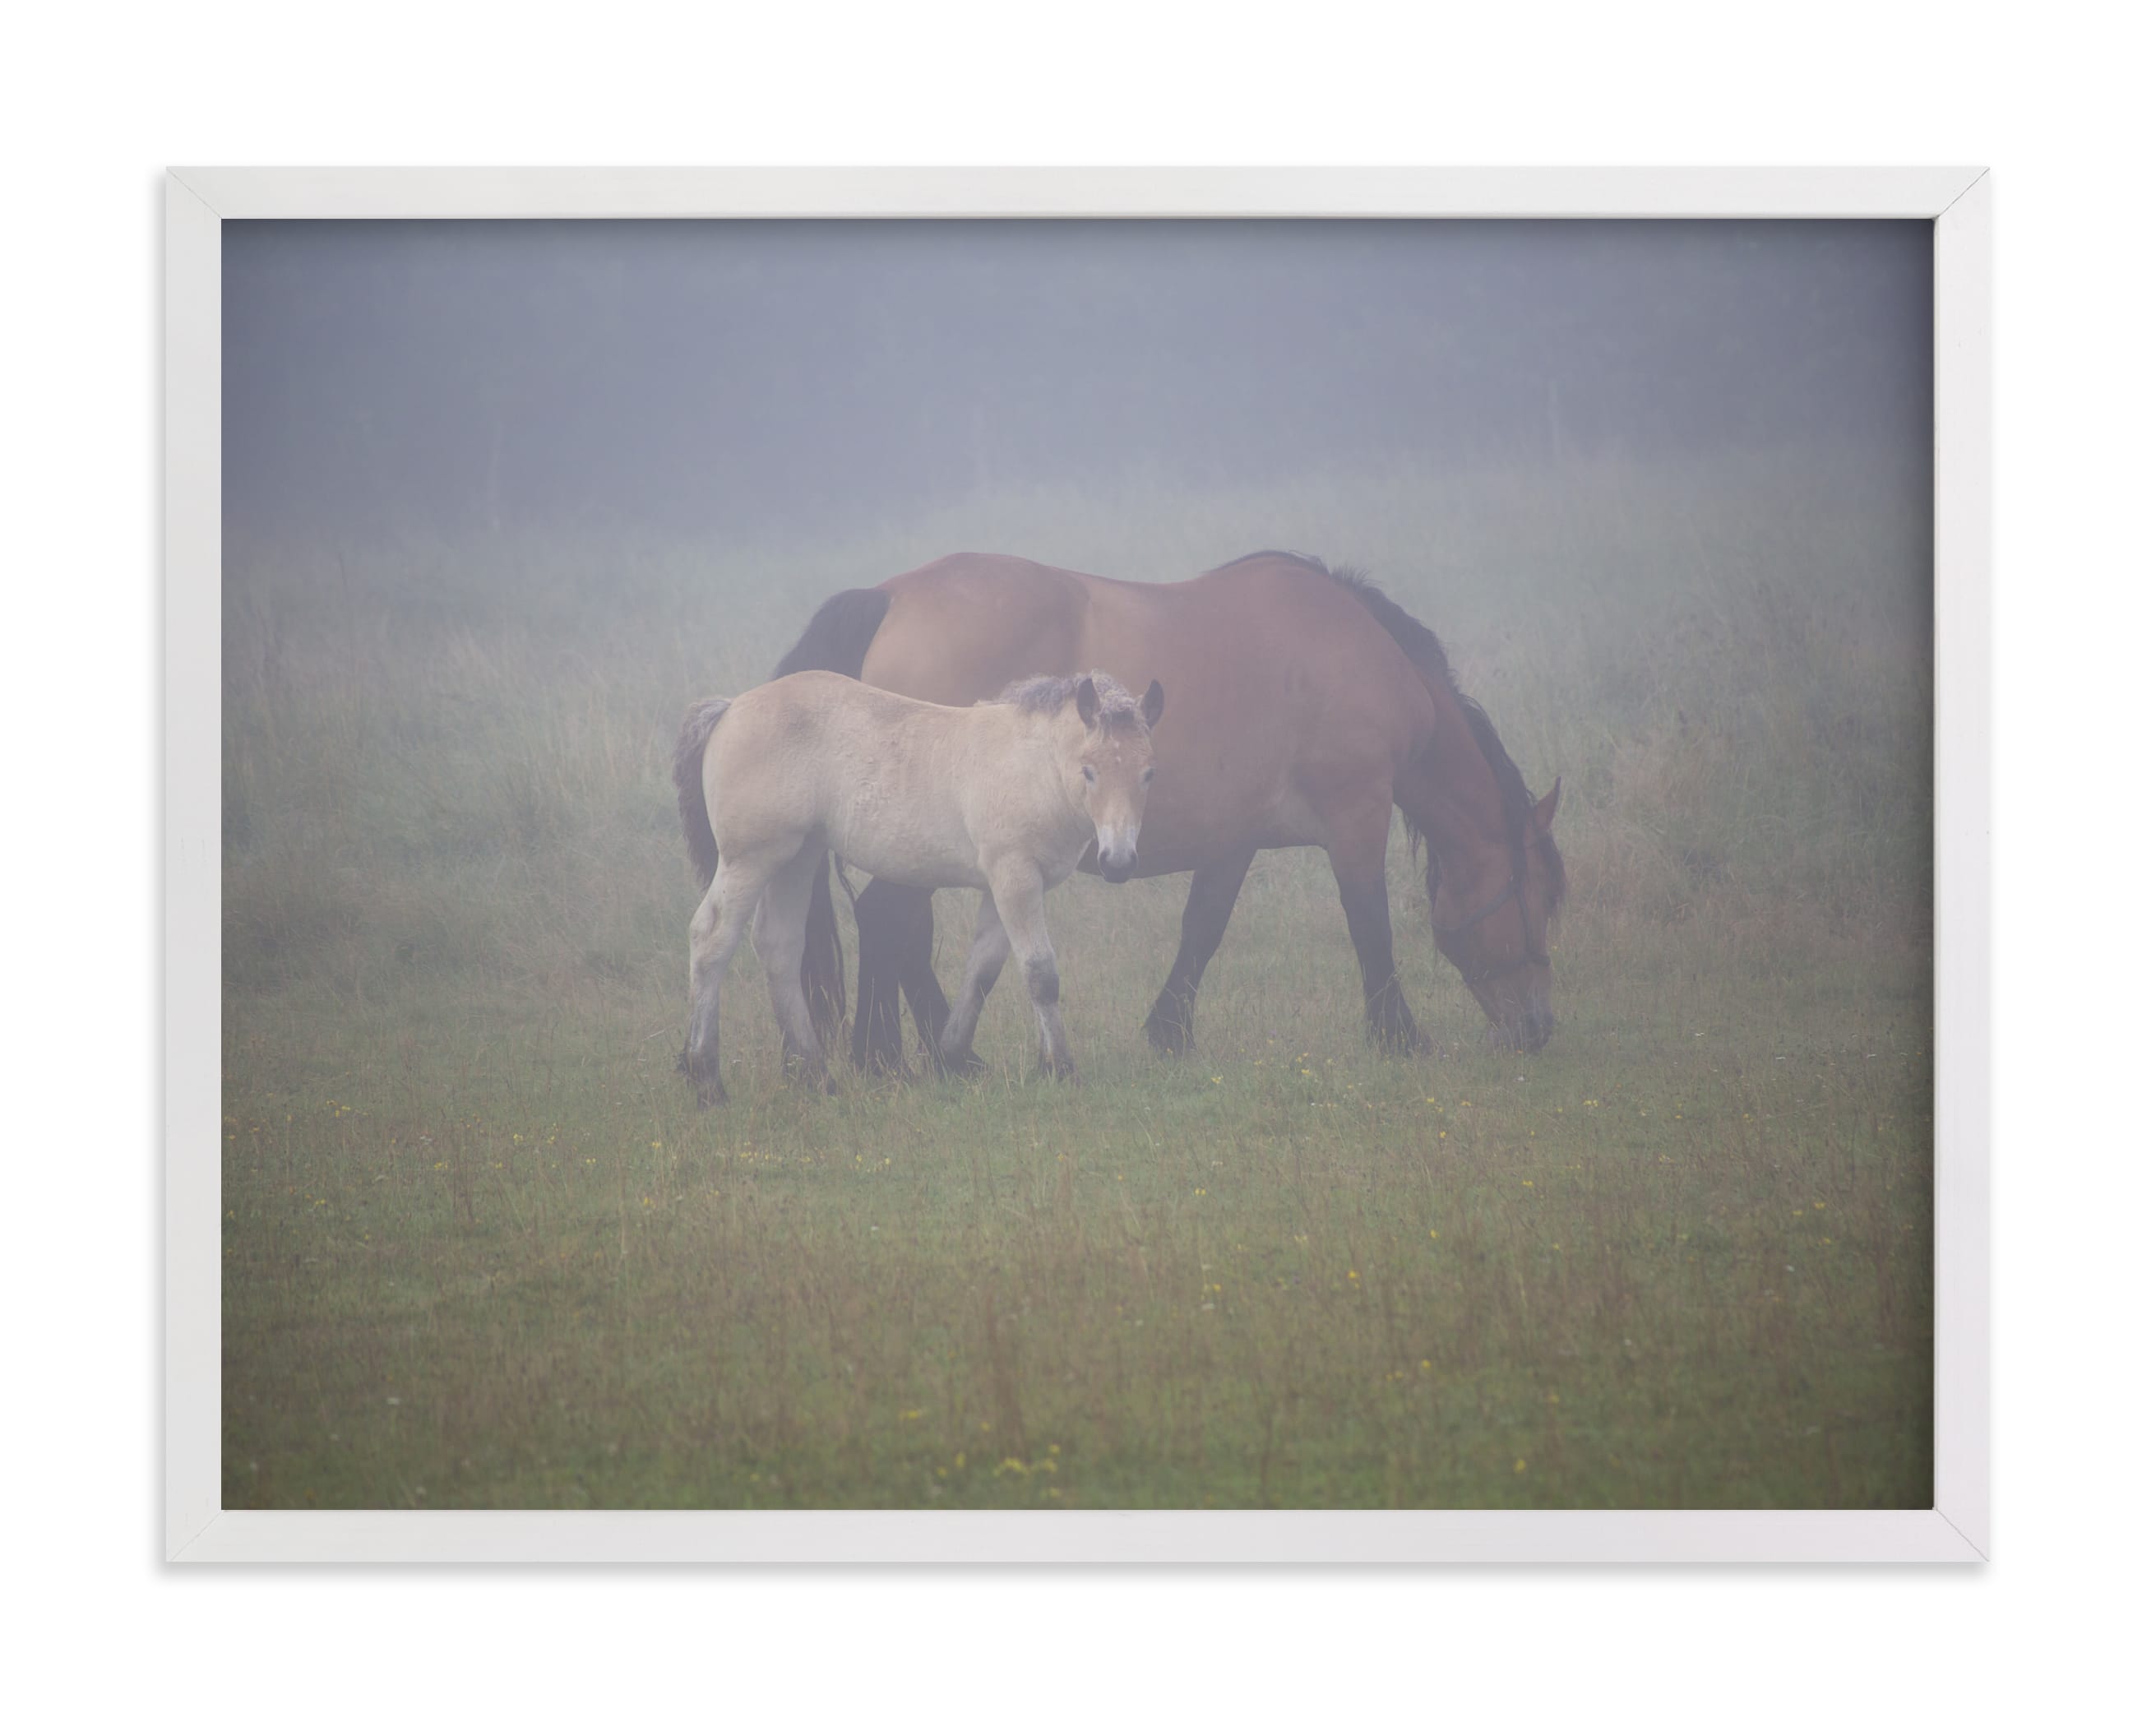 "A foal with its mother" by Lying on the grass in beautiful frame options and a variety of sizes.